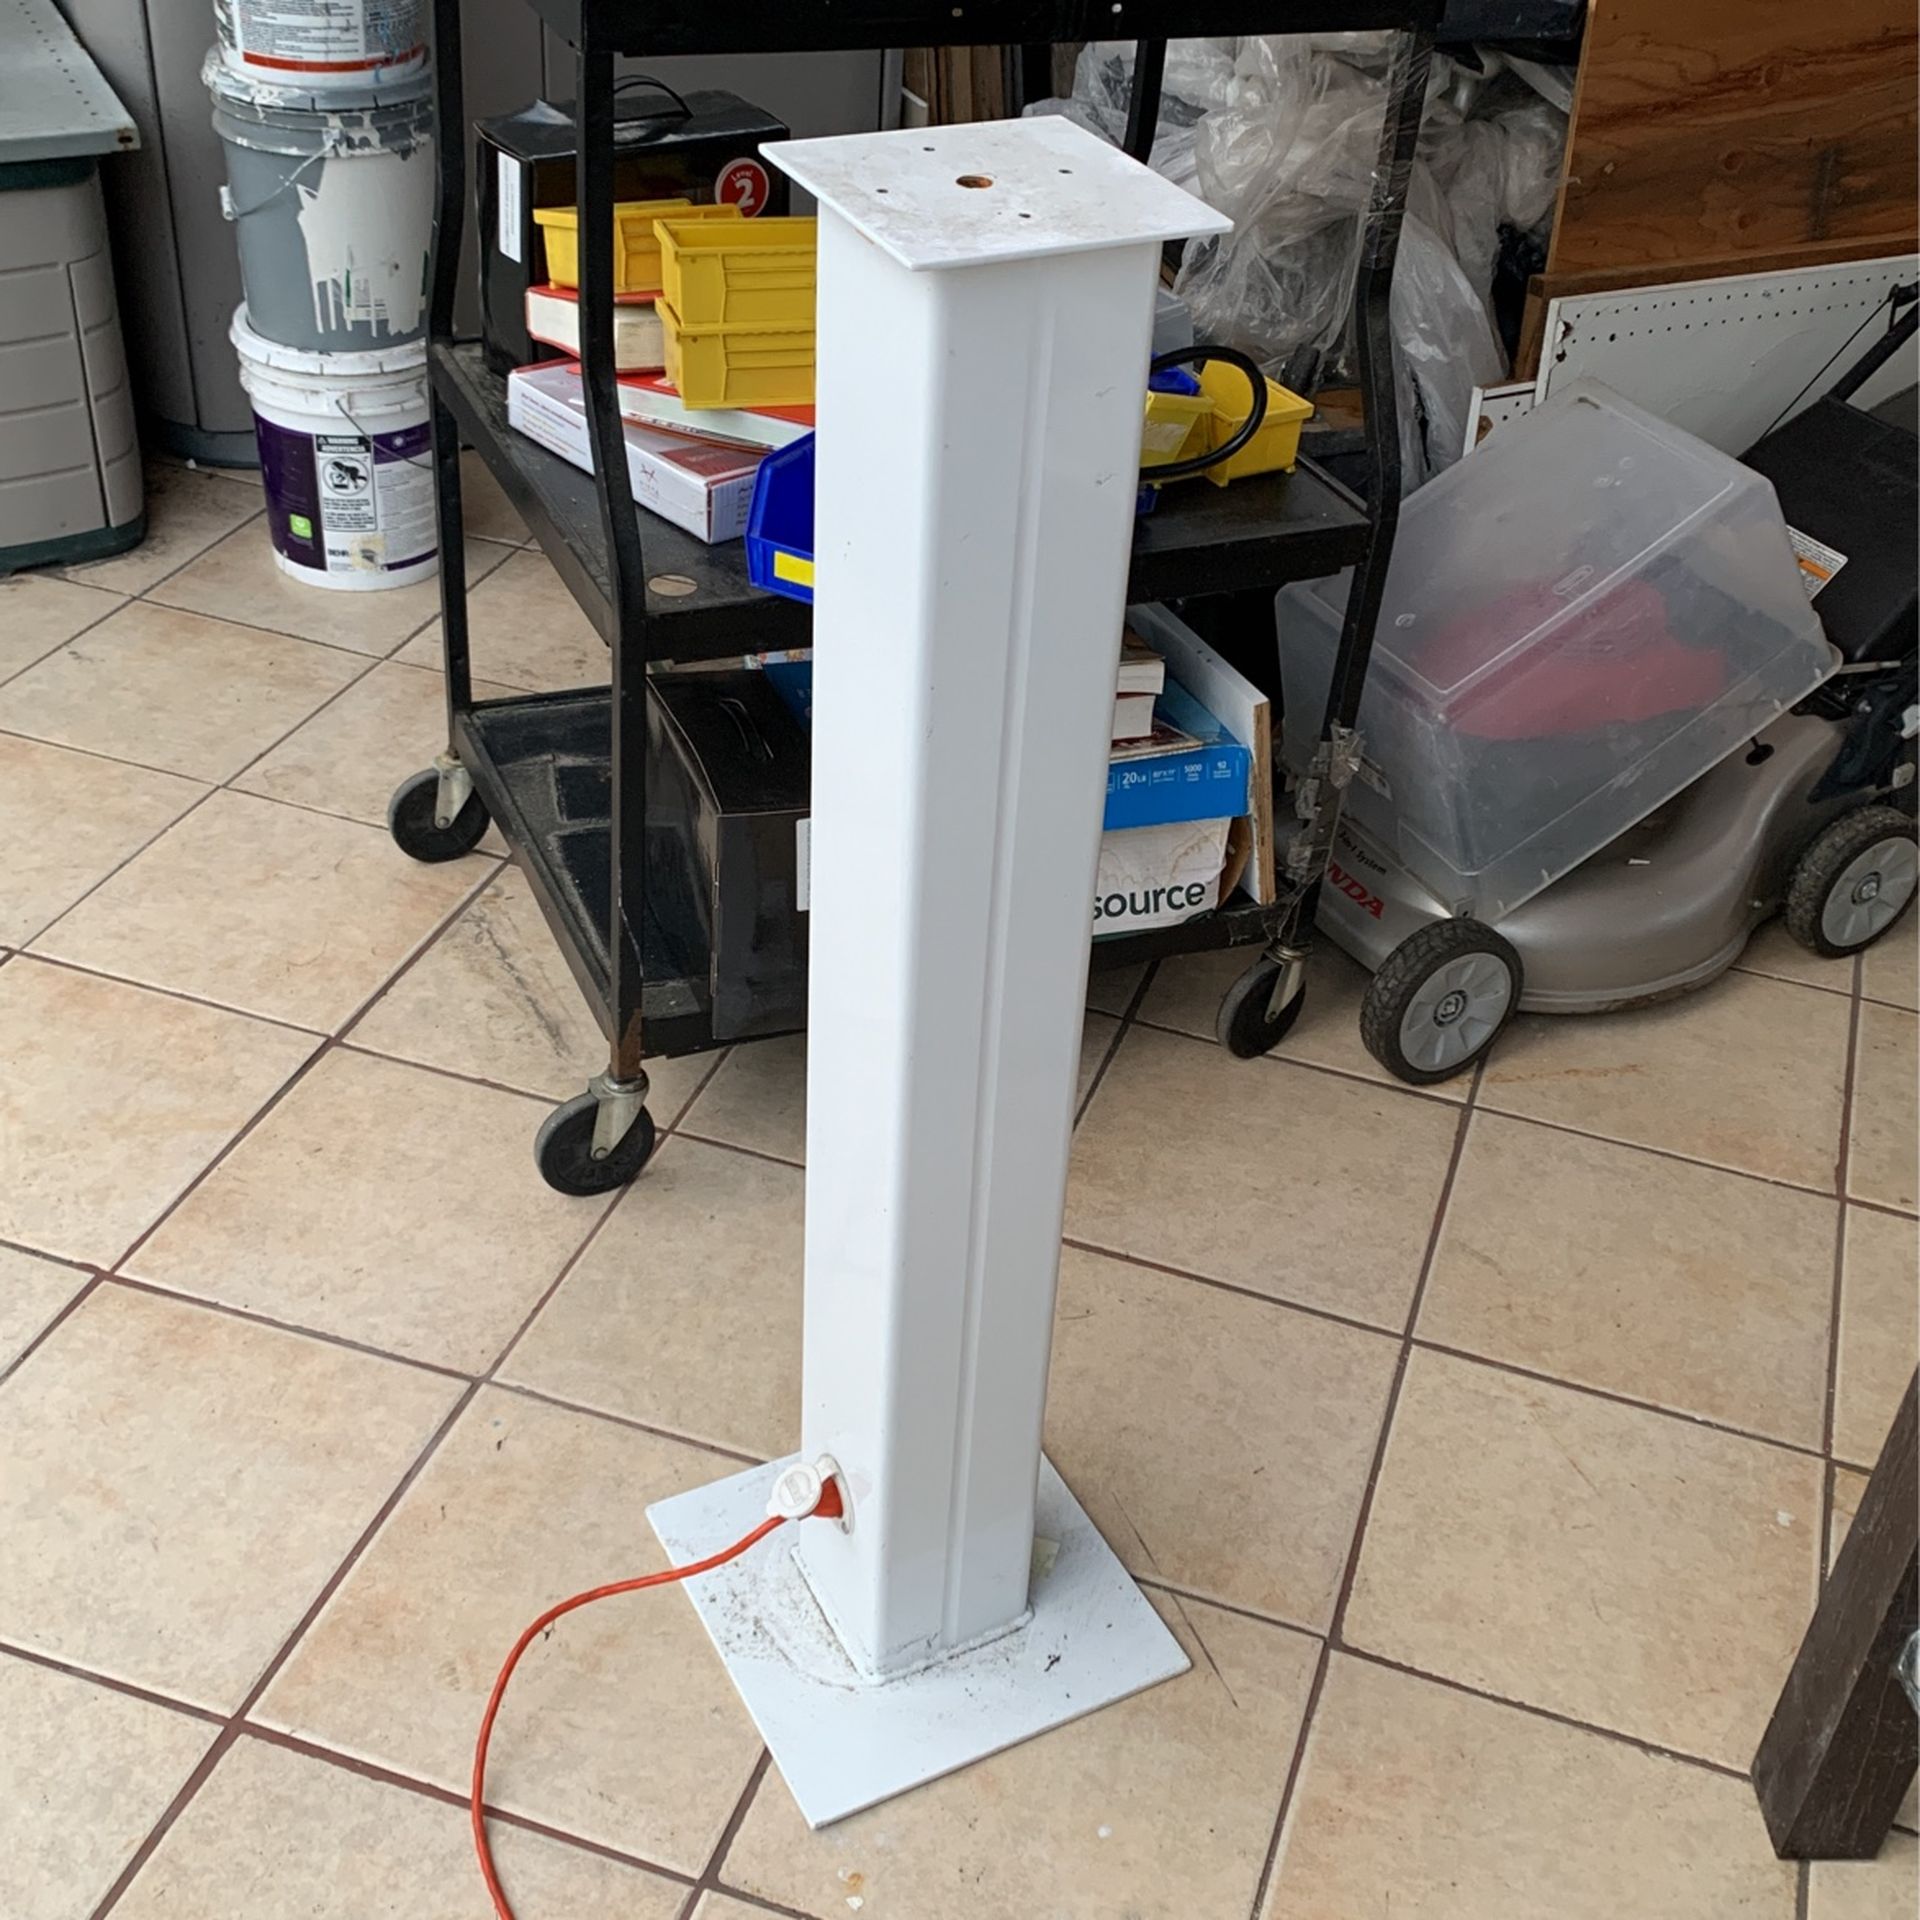 Computer Utility Tower Stand. -Strong Heavy Metal-  OBO